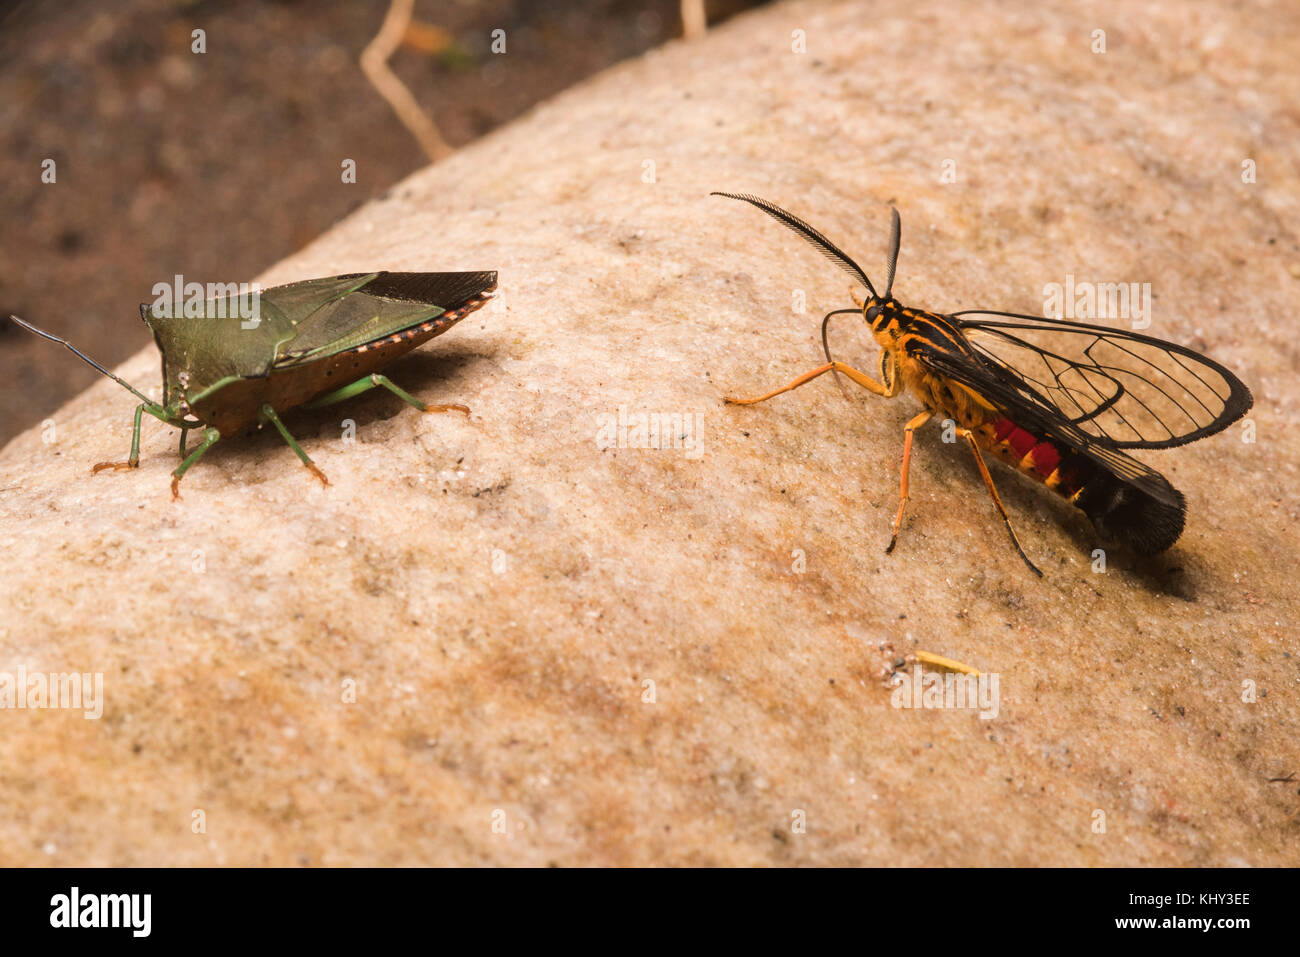 A wasp mimicking moth species in close proximity to a stink bug on a stone from a river bank in Peru. Stock Photo